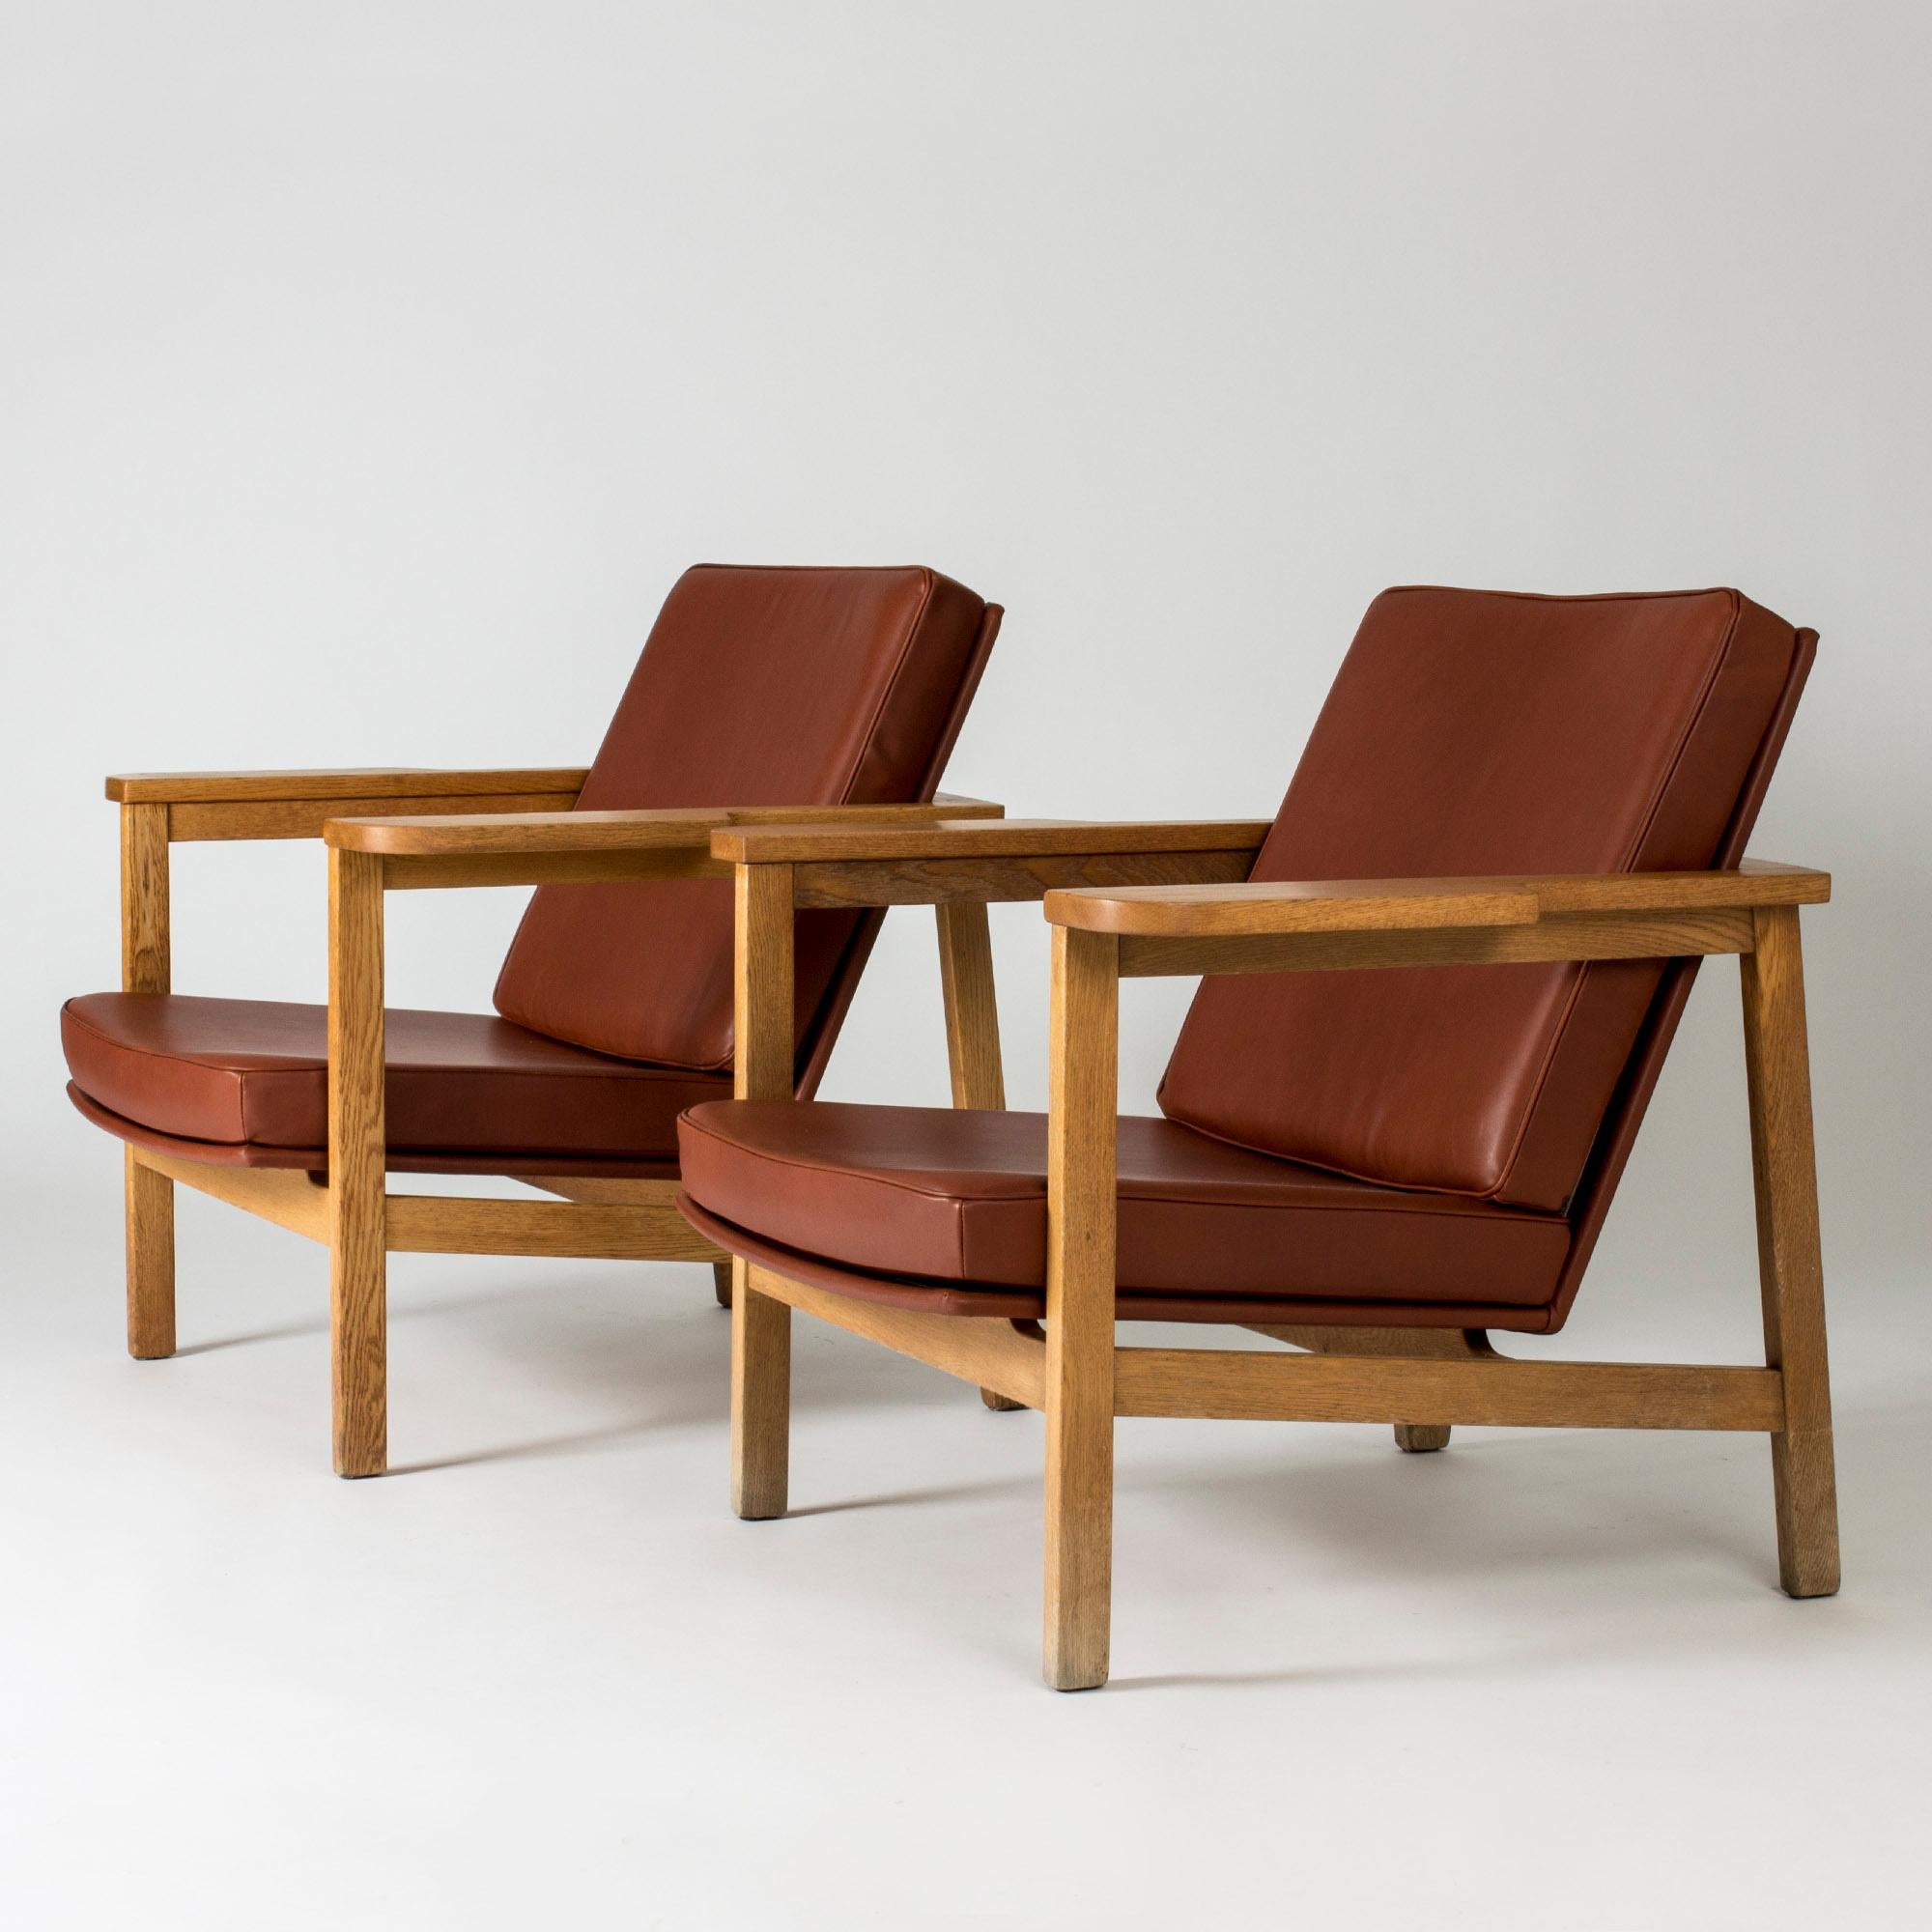 Pair of rare lounge chairs by Carl-Axel Acking in an imposing, luxurious design. Hefty oak frame with wide armrests and an elegant, open silhouette. Rust red leather upholstery.